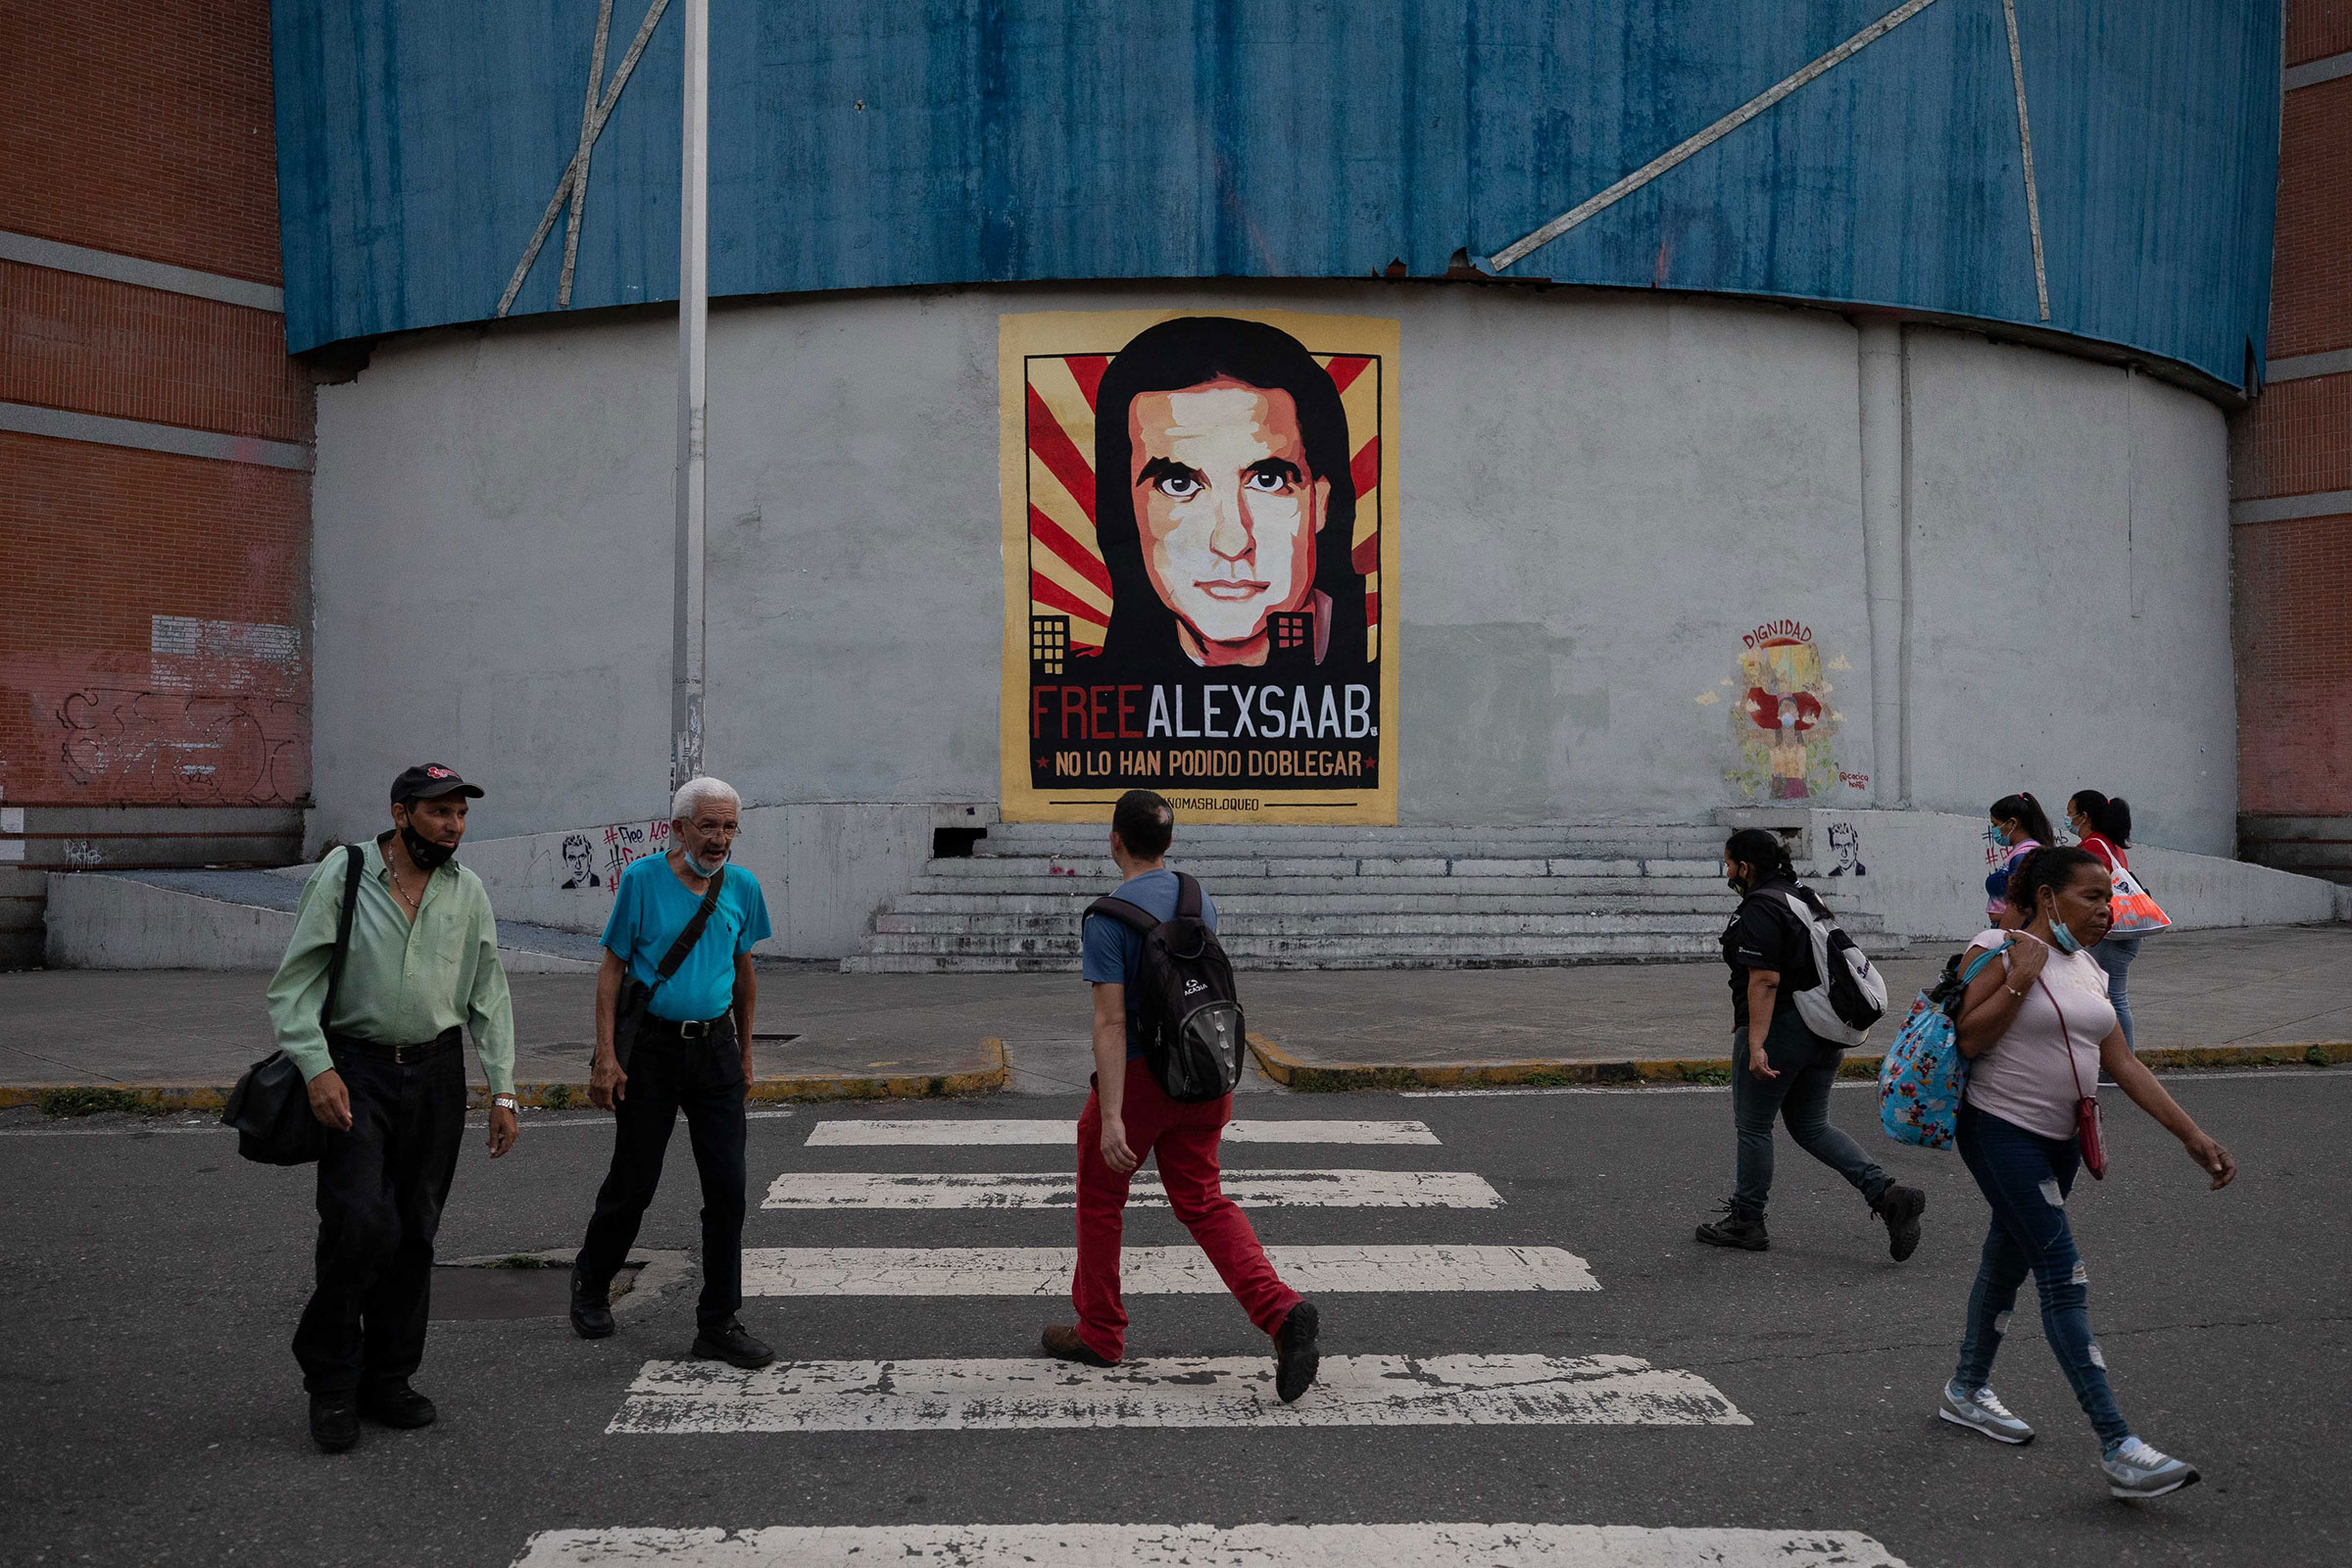 People walk in front of a mural with the image of Alex Saab in Caracas, Venezuela, October 25, 2021. (Rayner Pena—EPA-EFE/Shutterstock)